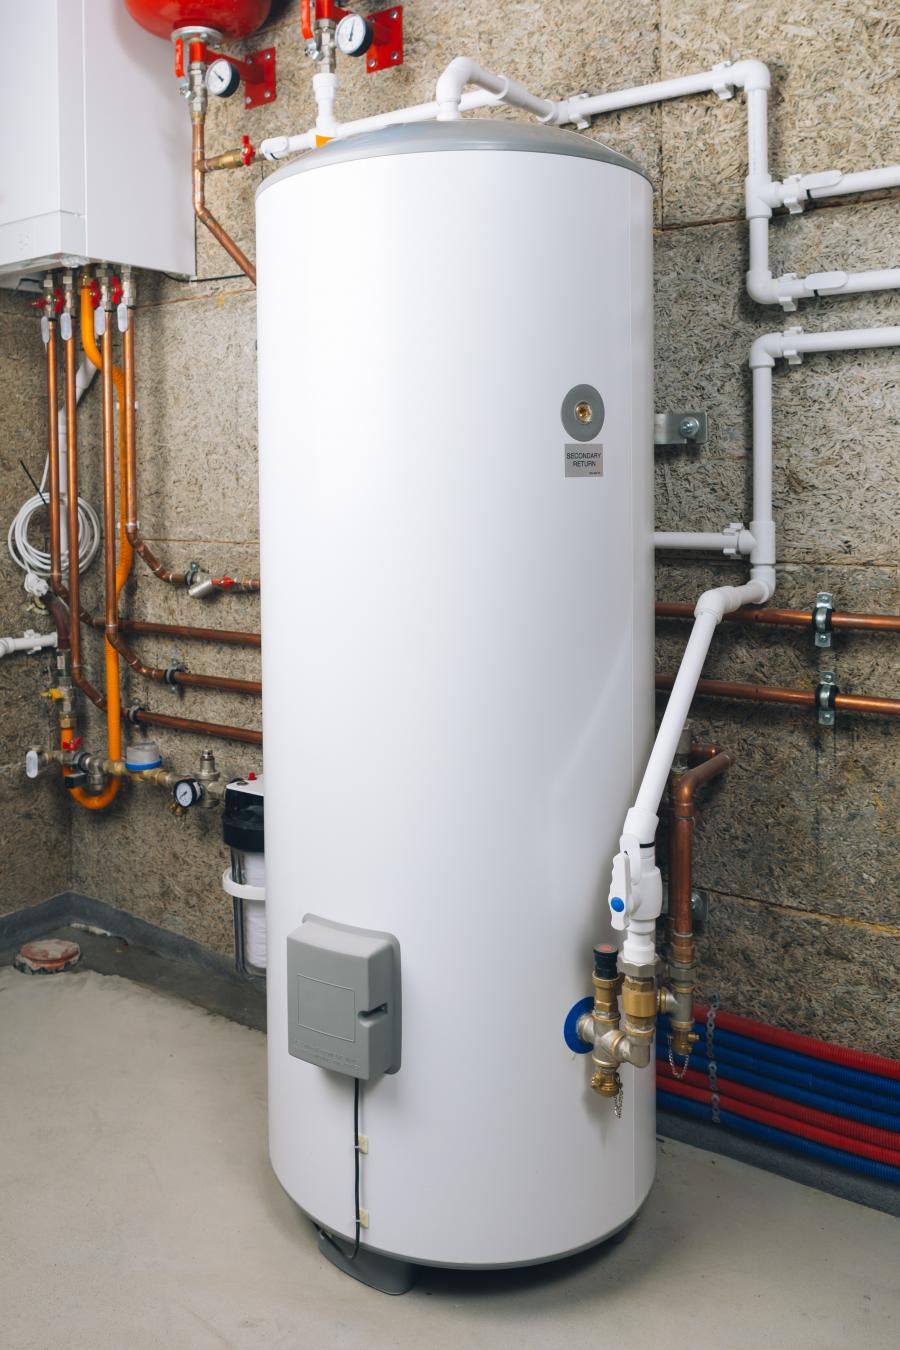 a photo of a white water heater and lots of pipes in the background